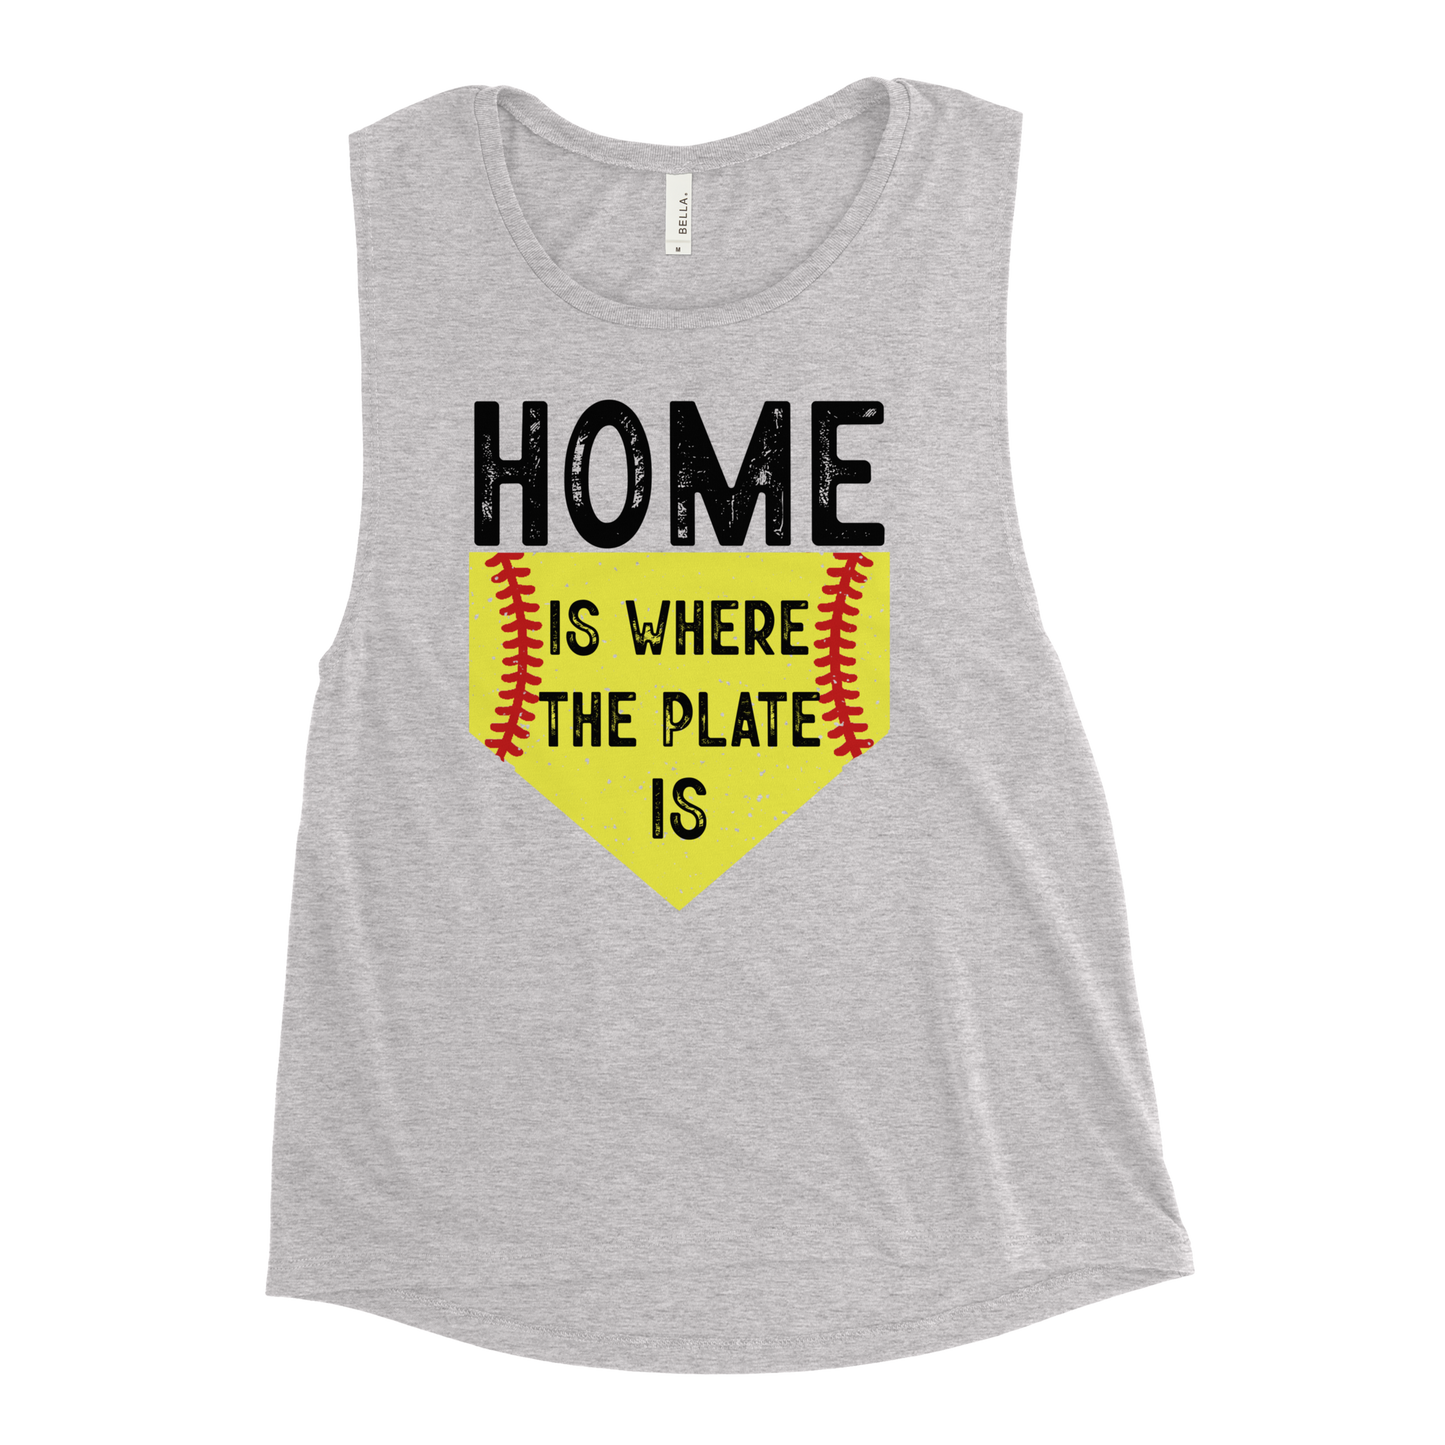 Home Is Where The Plate Is Tank (Softball)